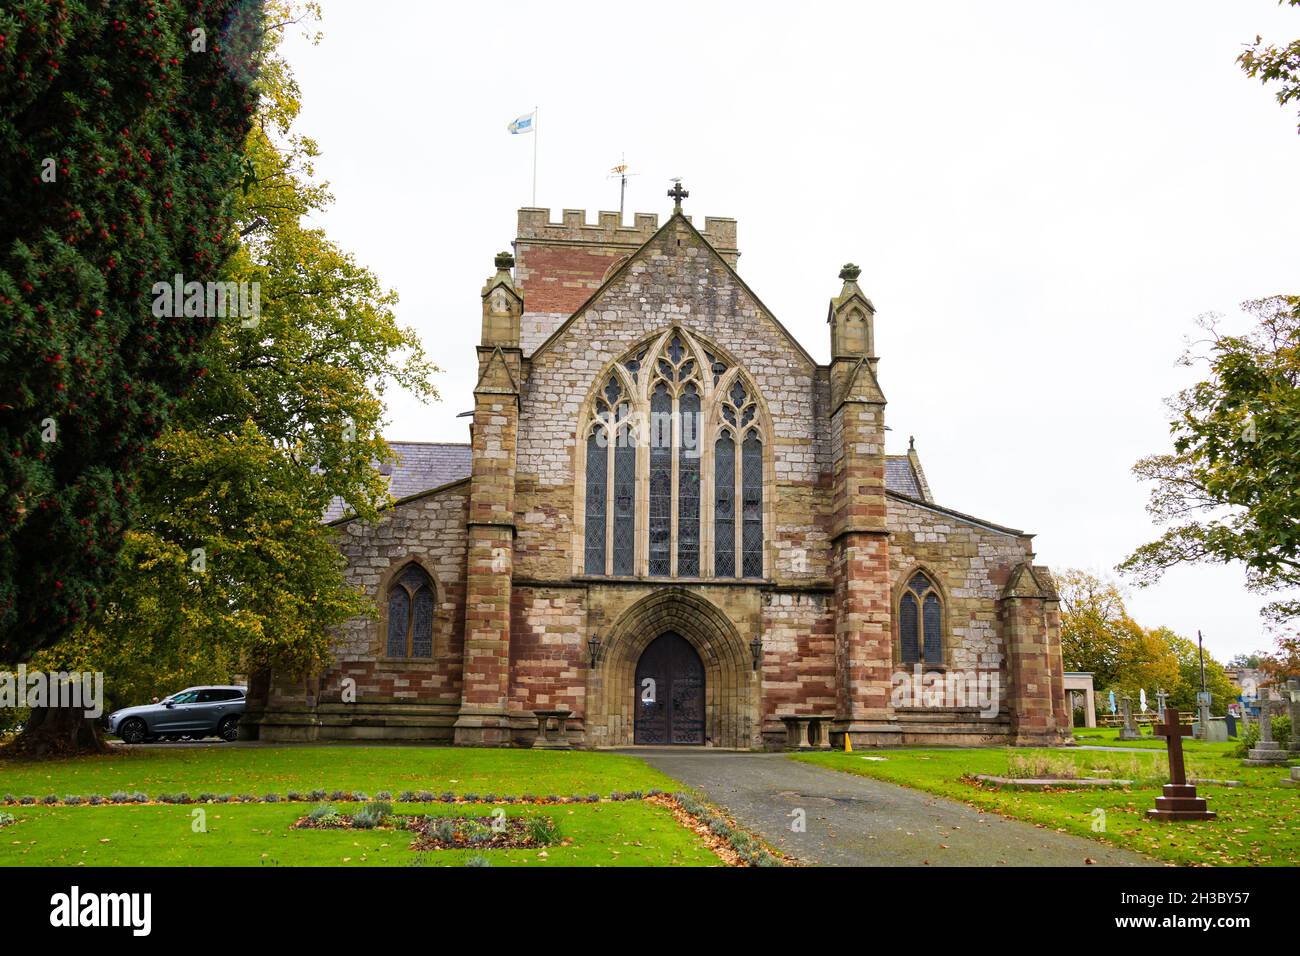 Britains second smallest cathedral.  Asaphs cathedral, St Asaph. Denbighshire, Wales. Stock Photo